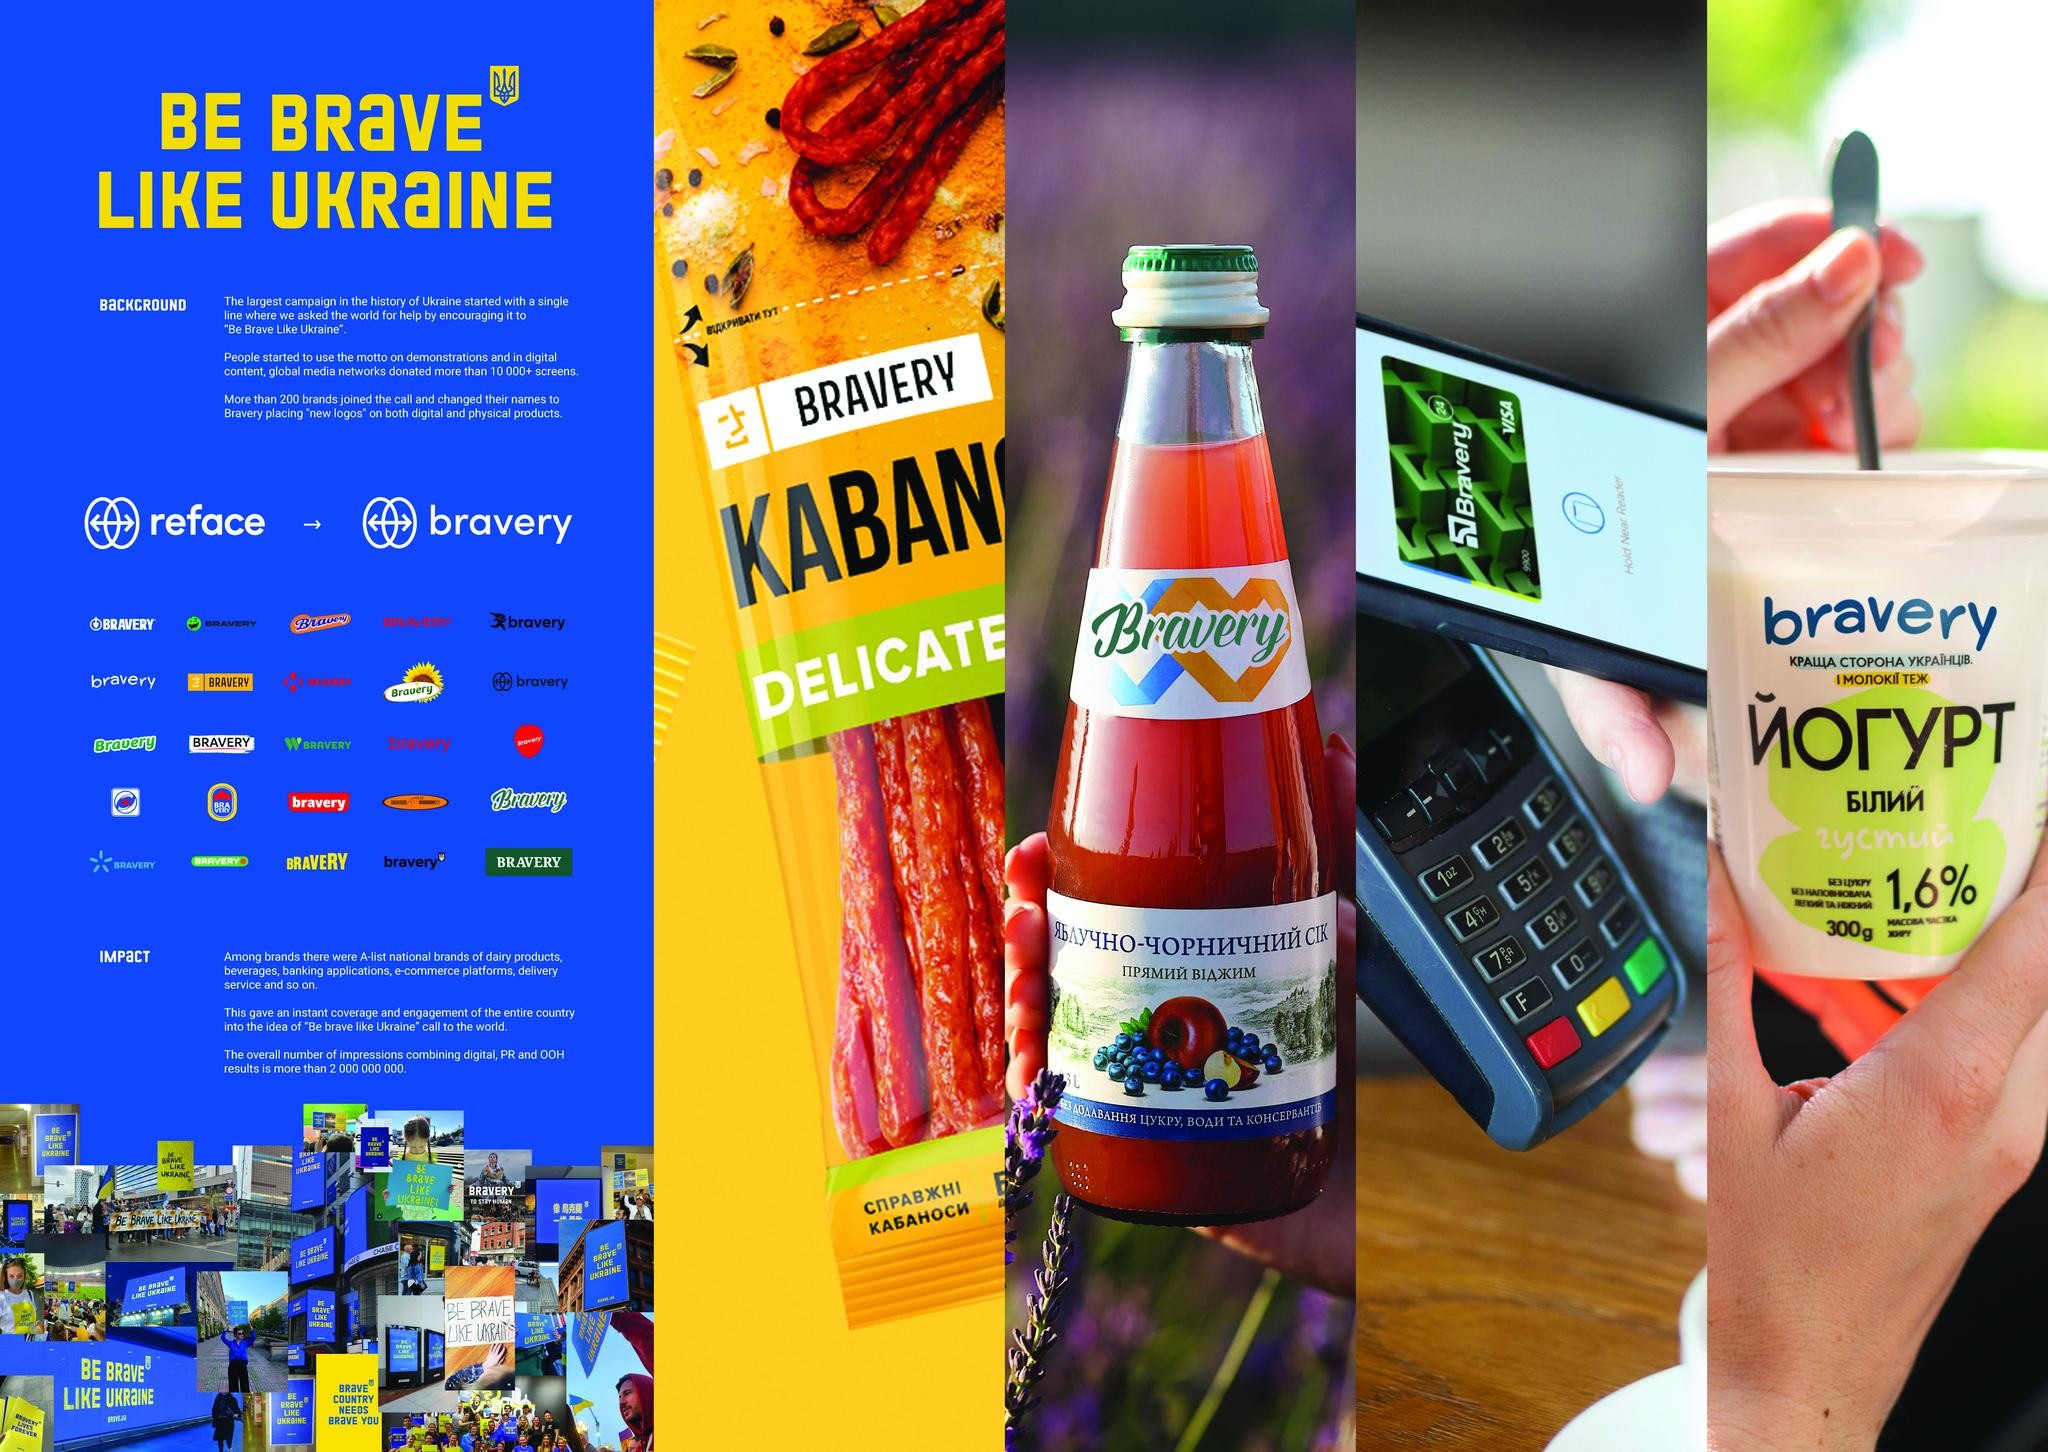 Be Brave Like Ukraine. How 200 brands changed their name to Bravery